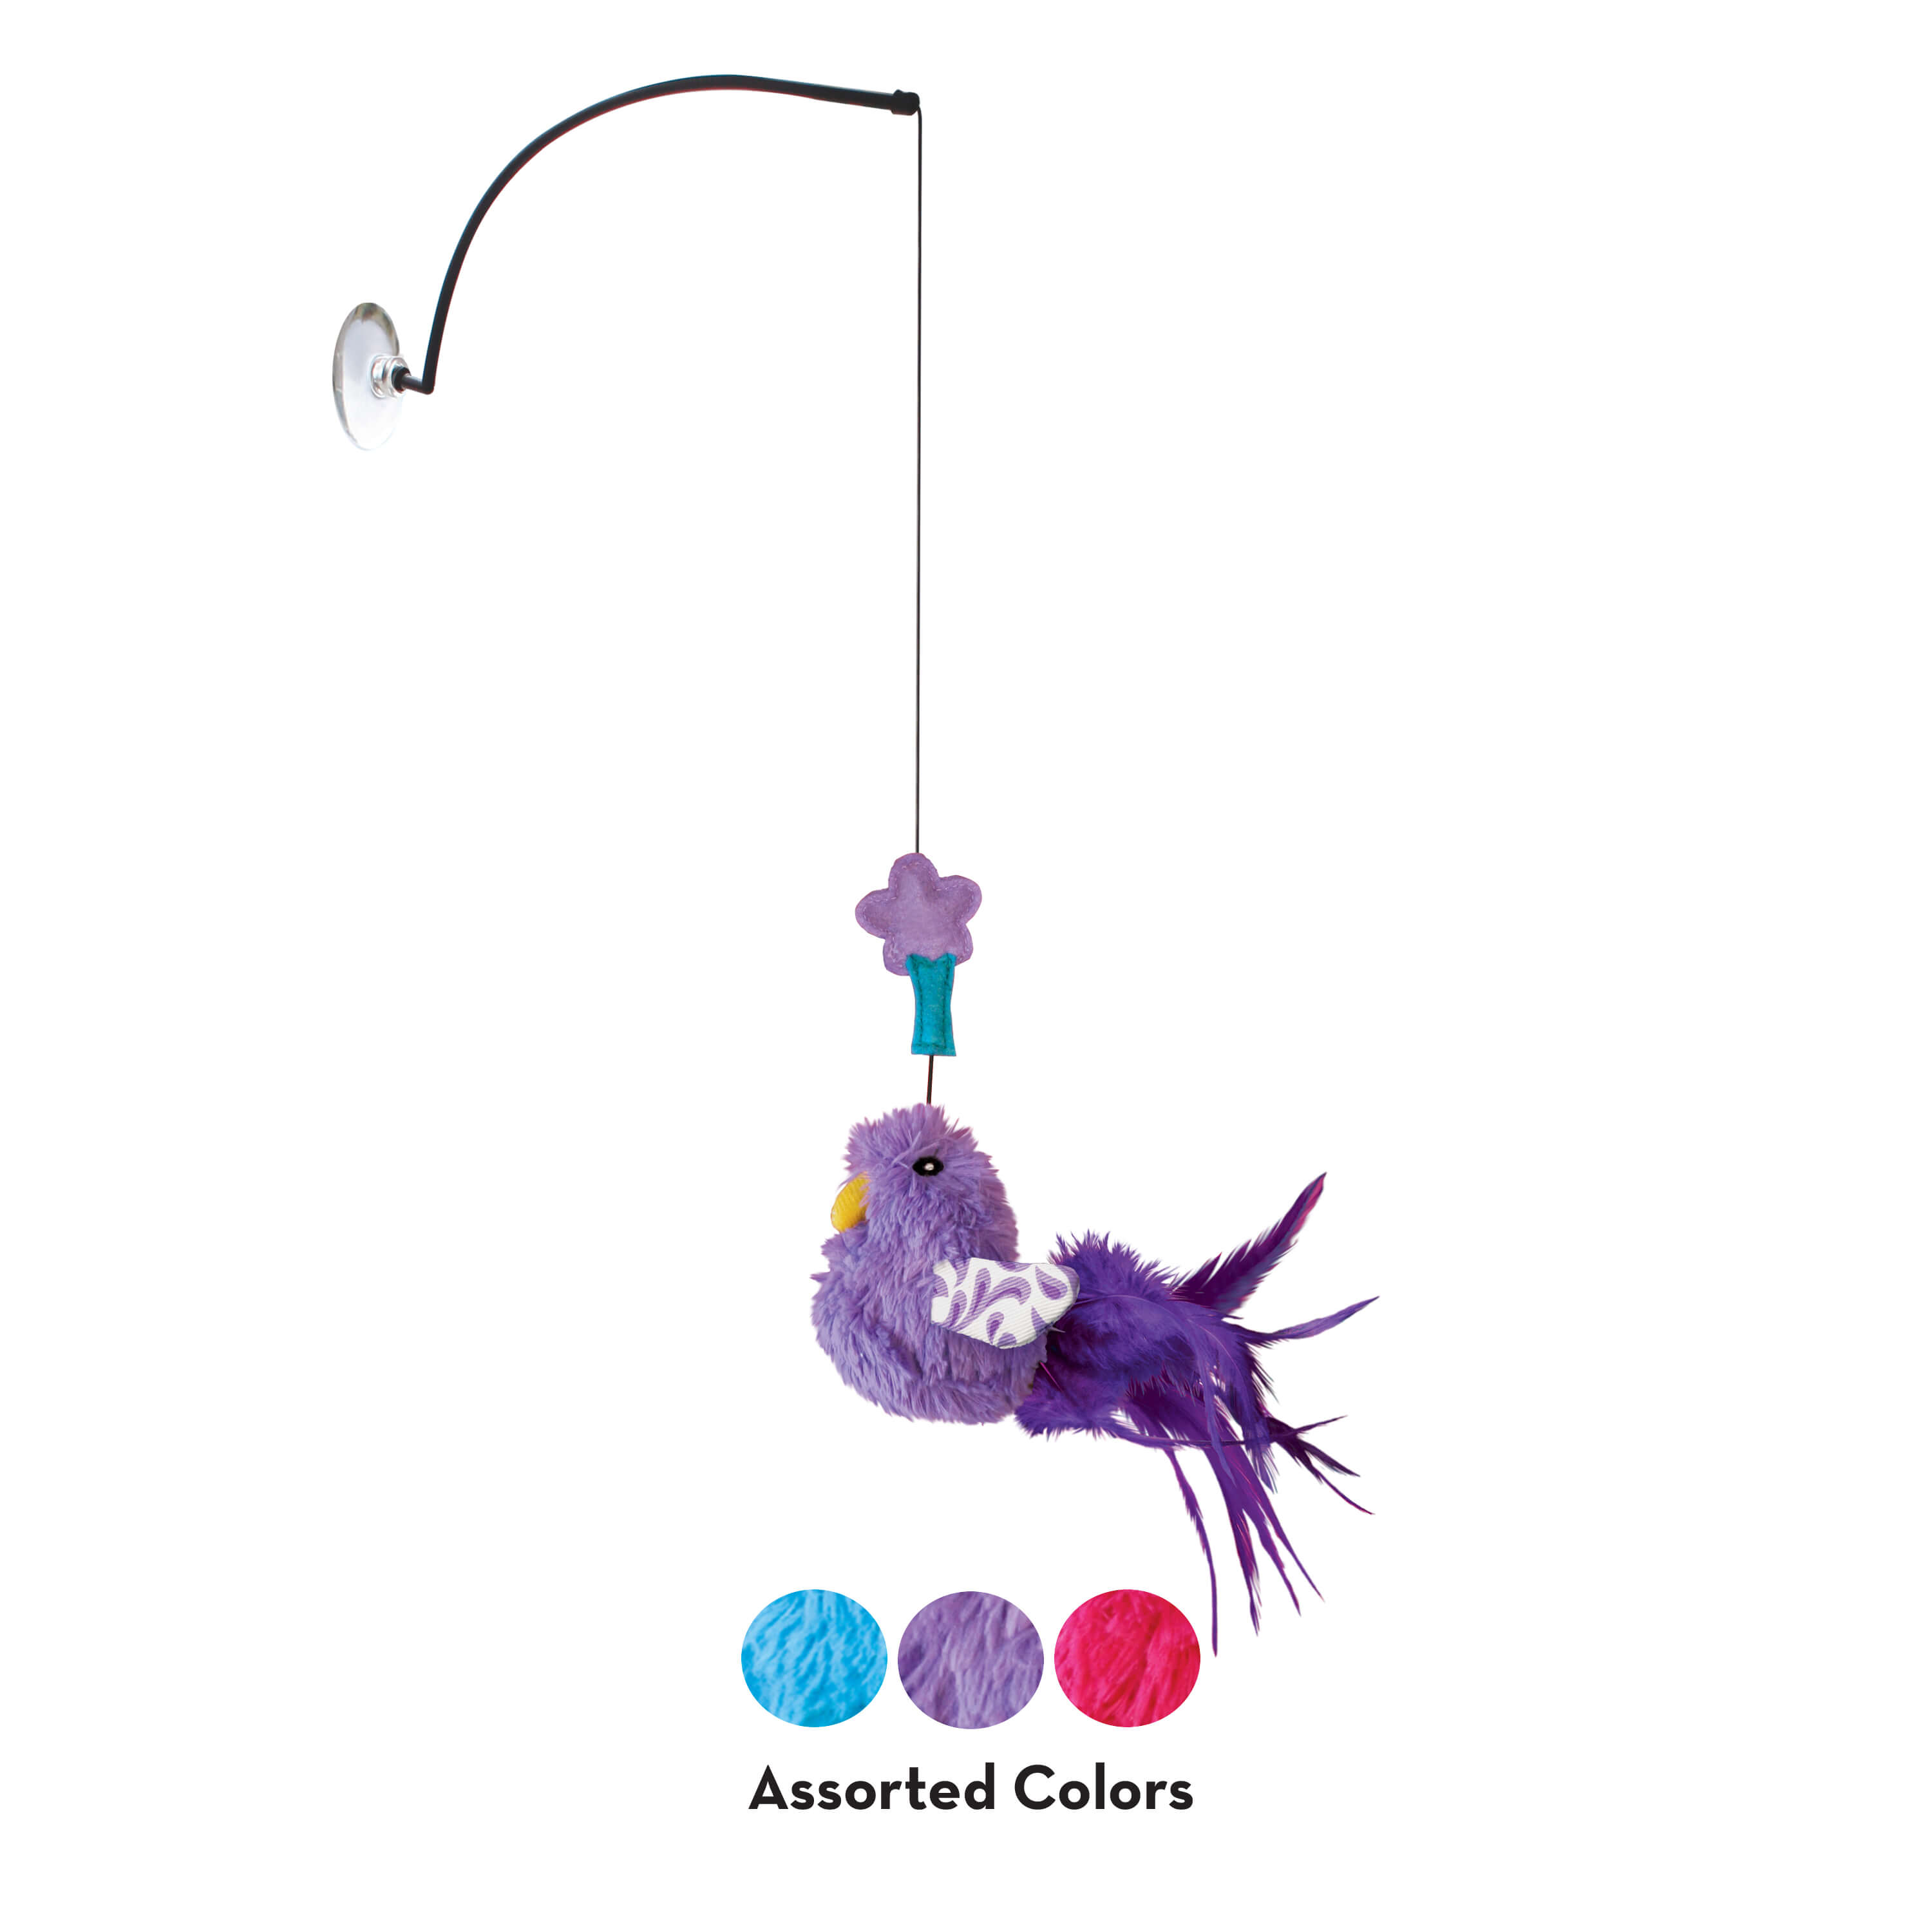 Chart with assorted colors (blue, purple, pink)